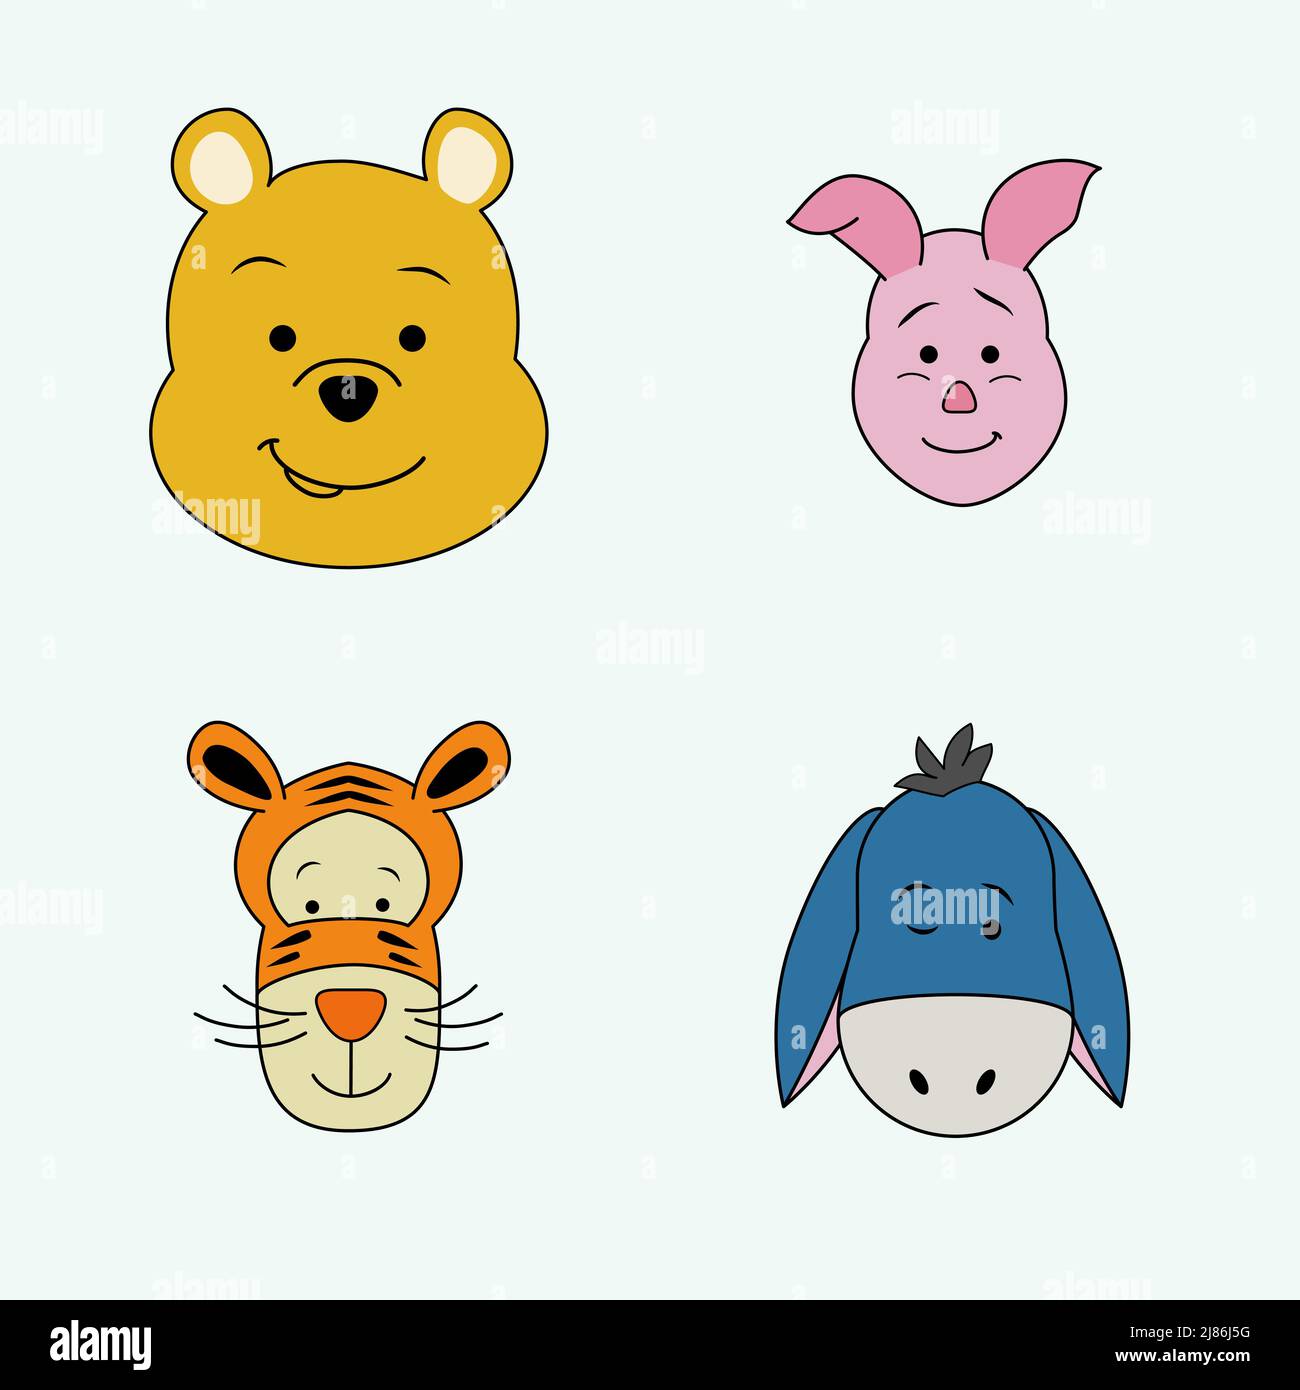 Characters in Winnie the Pooh, Piglet, Tiger, Donkey. Vector flat illustration. Stock Vector